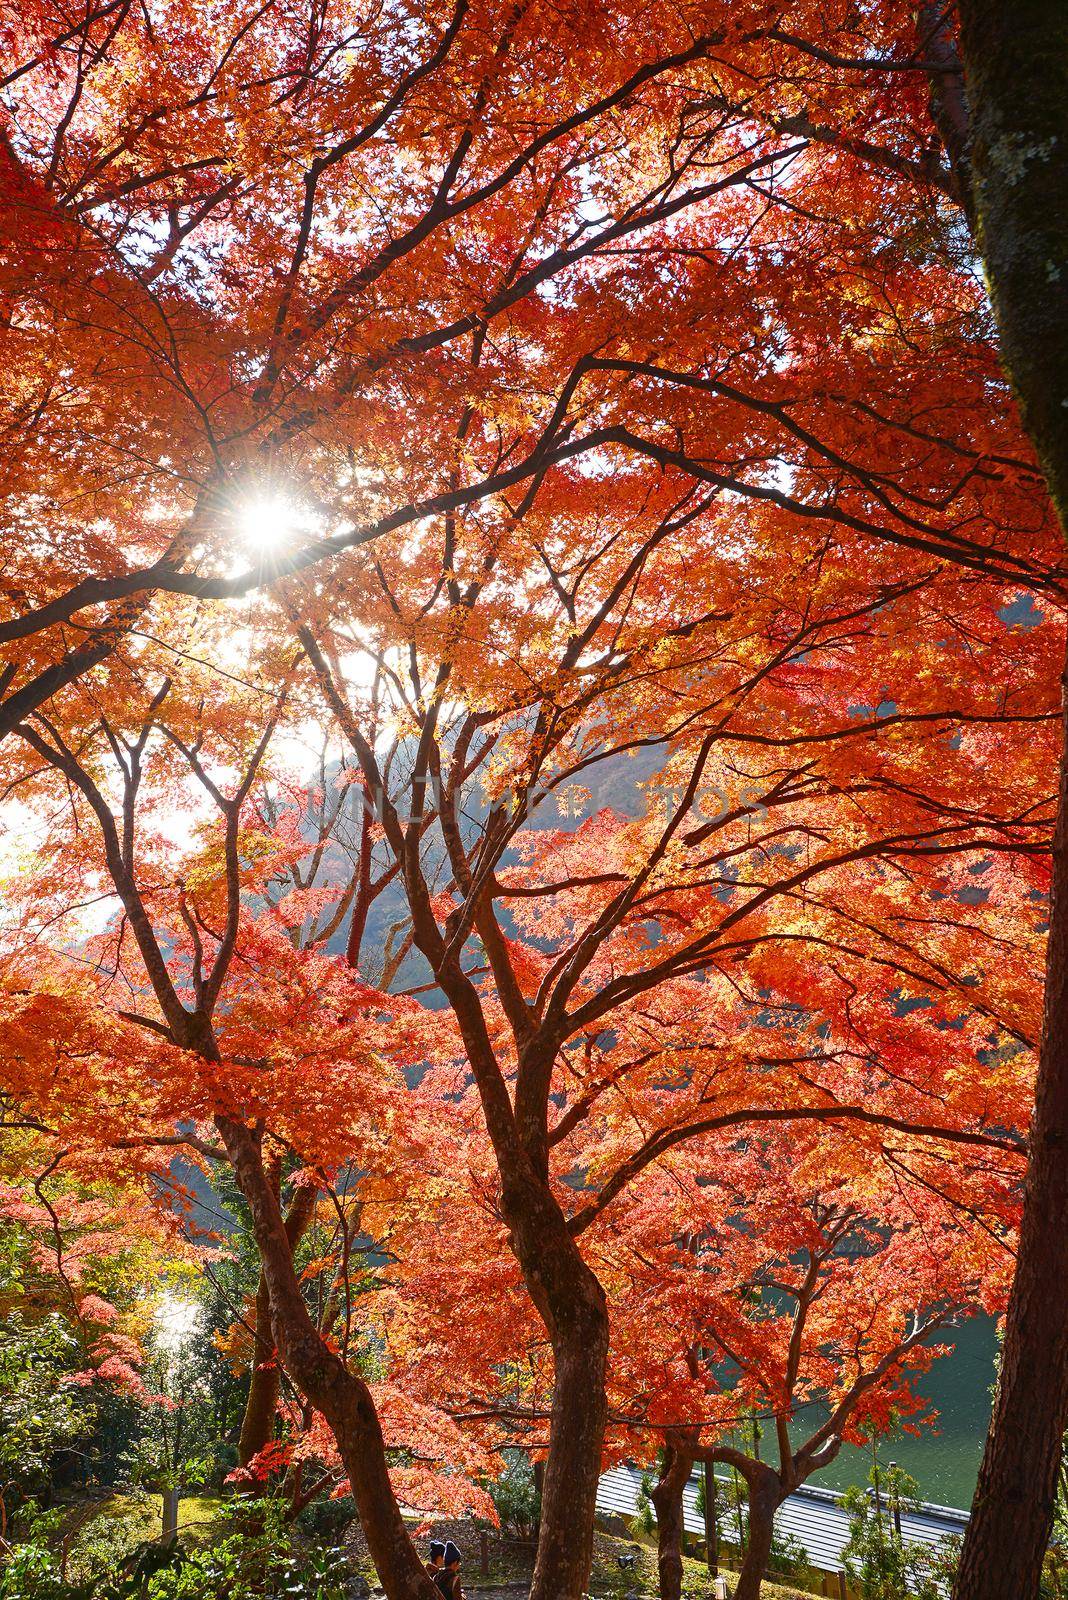 colorful maple leaves and branches from kyoto, japan